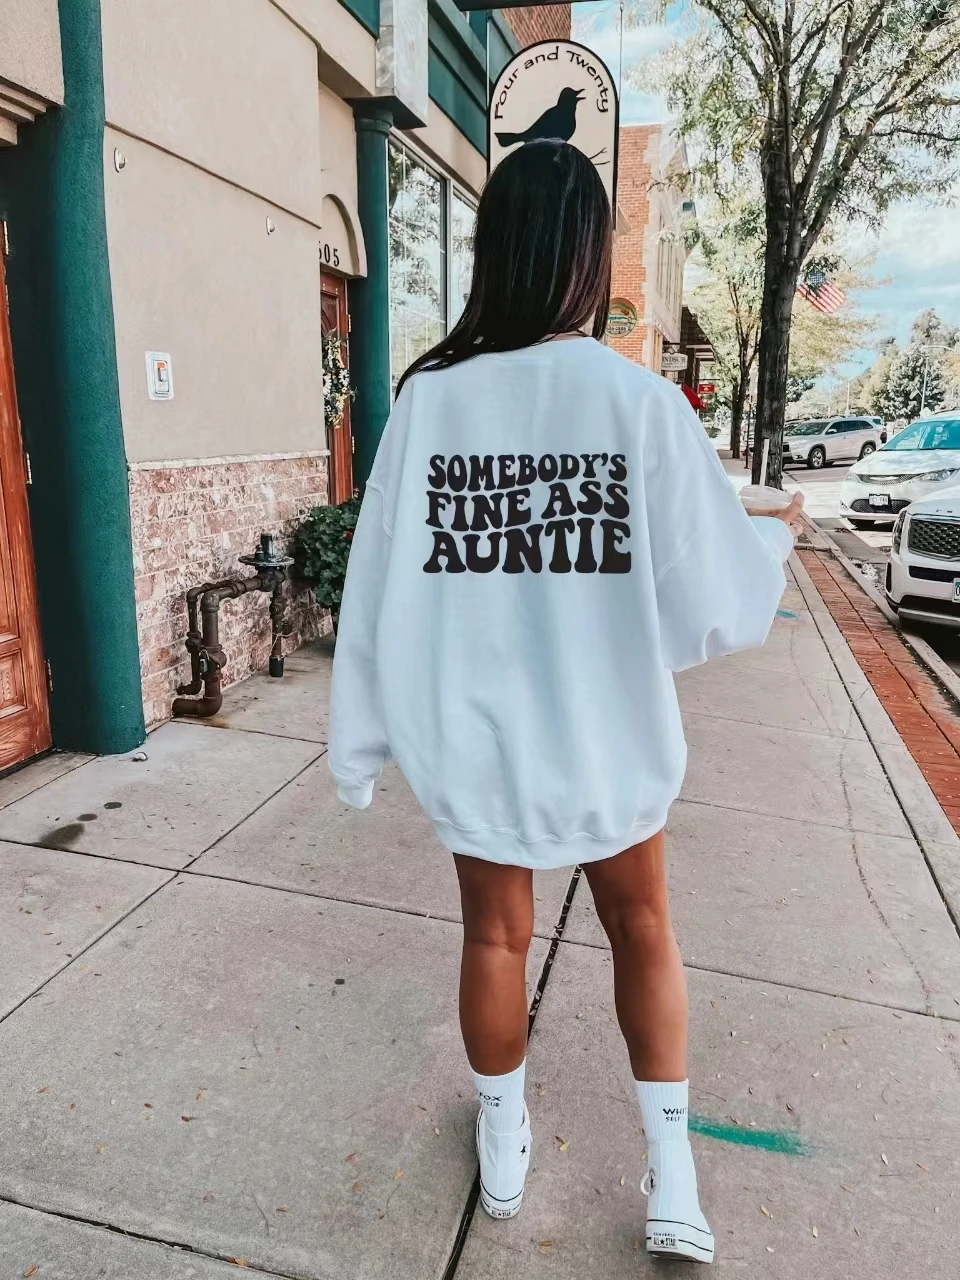 

Somebody's Fine Ass Auntie Funny Slogan Sweatshirt New Hot Sale Street Casual Female Clothes Stylish Classy All Match Girl Tops